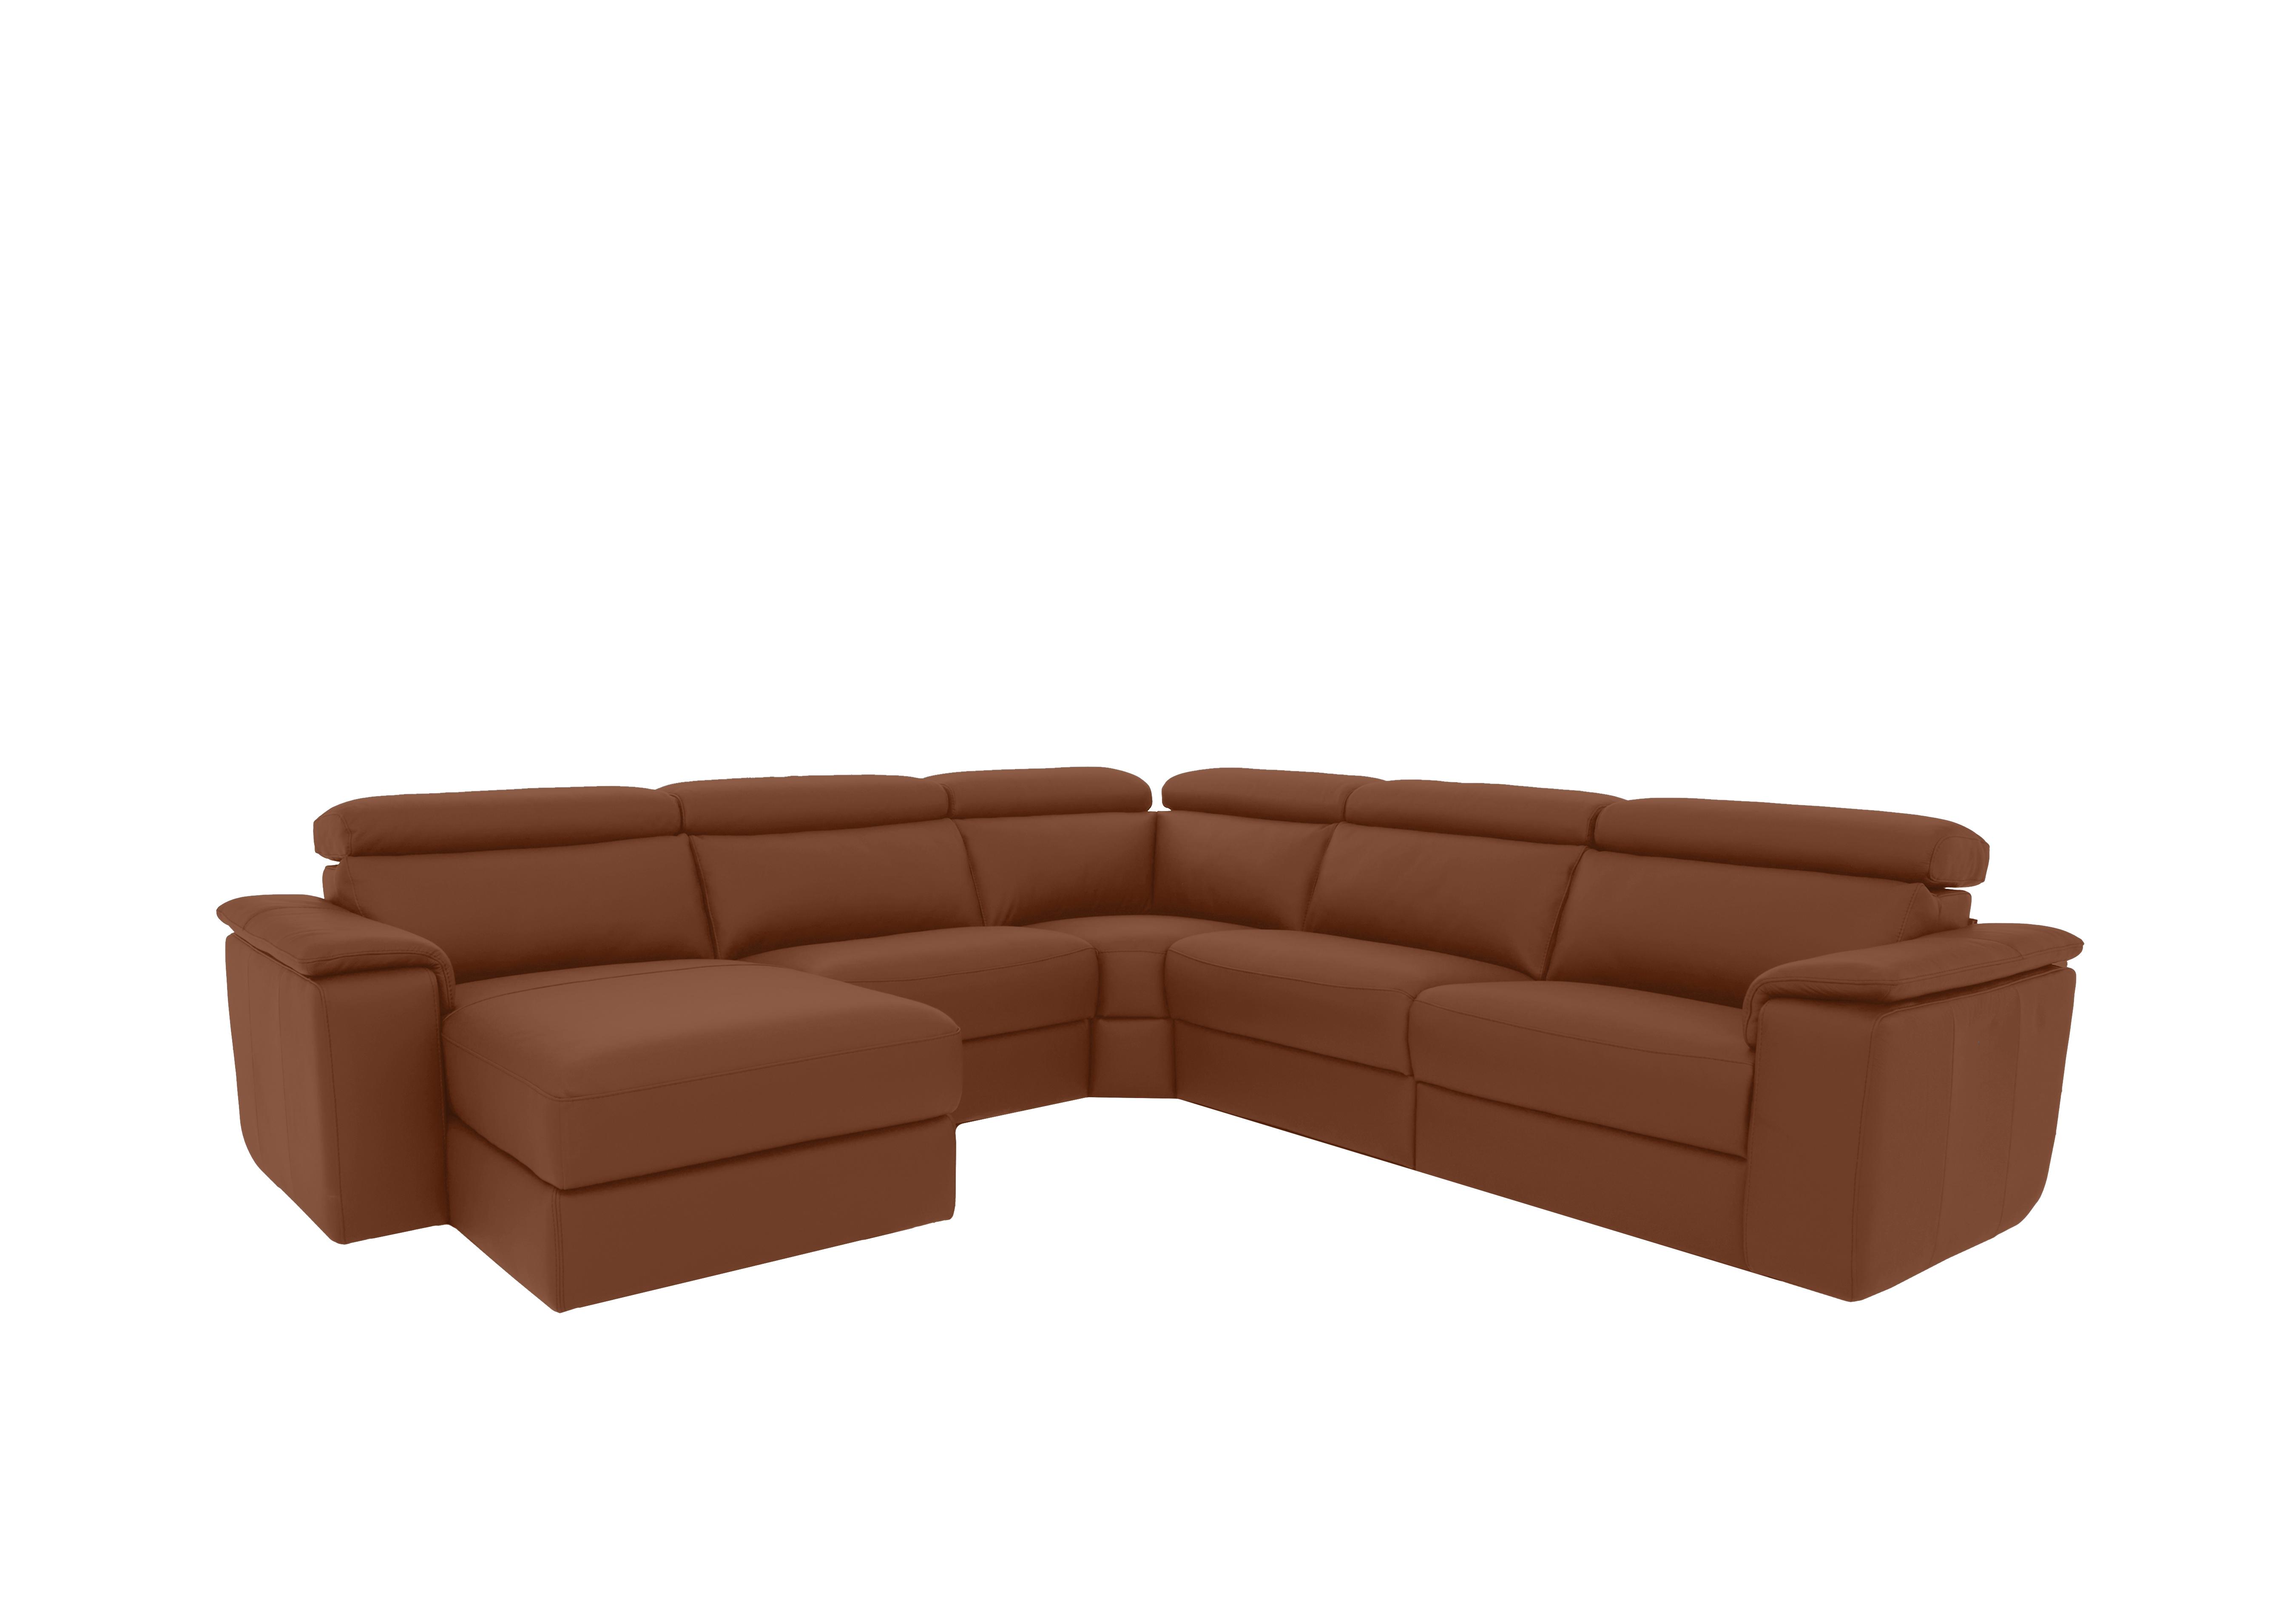 Davide Large Leather Corner Sofa with Chaise End in 363 Torello Cognac on Furniture Village